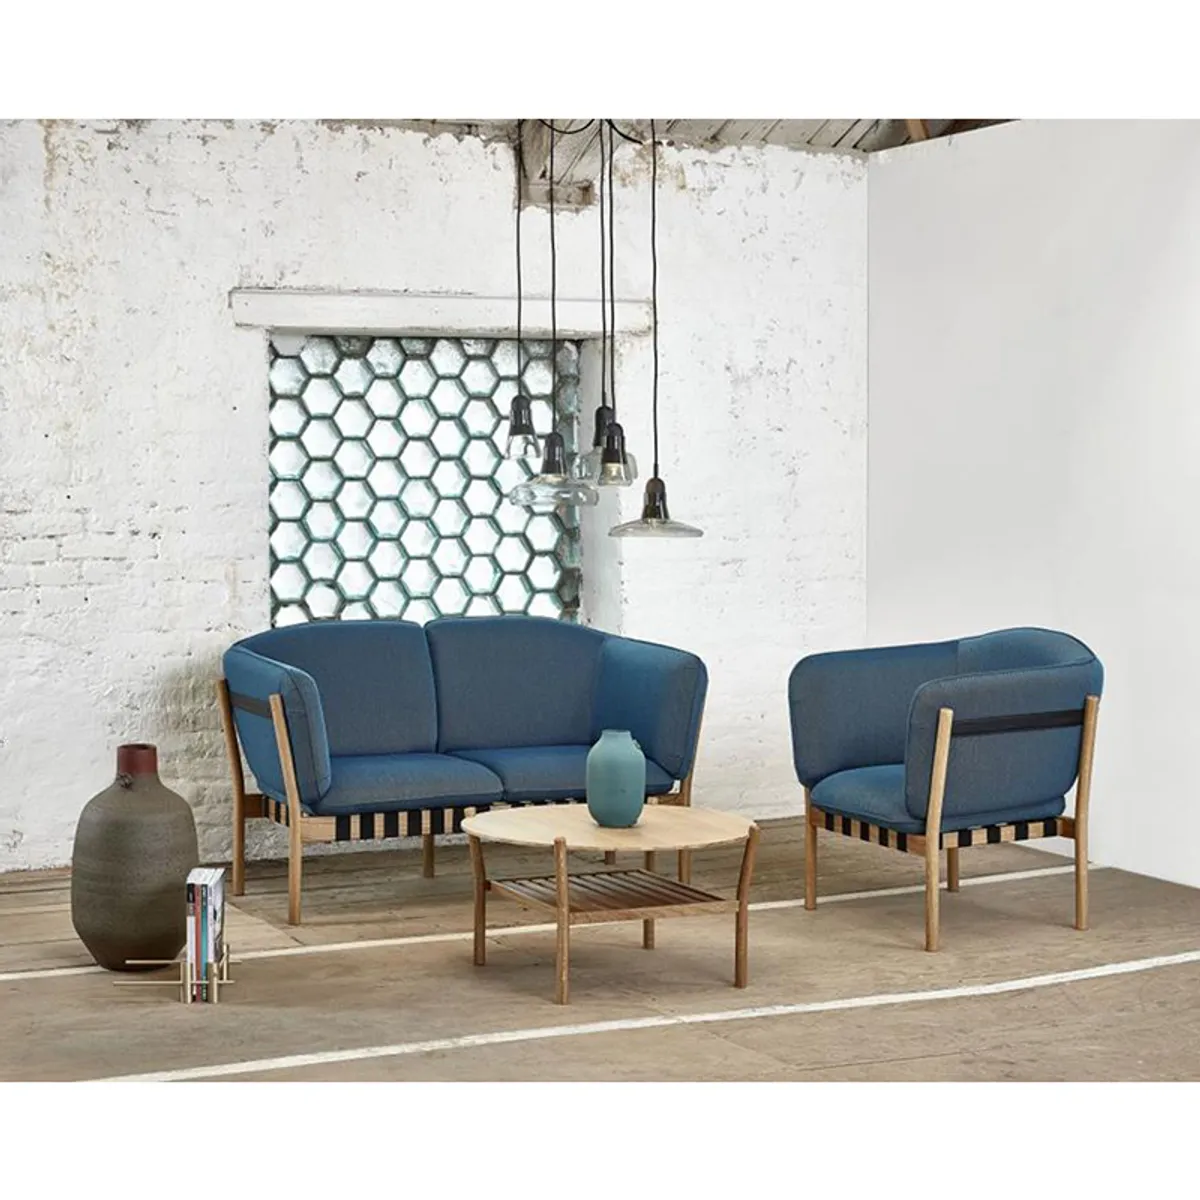 Dowel Chairs Together